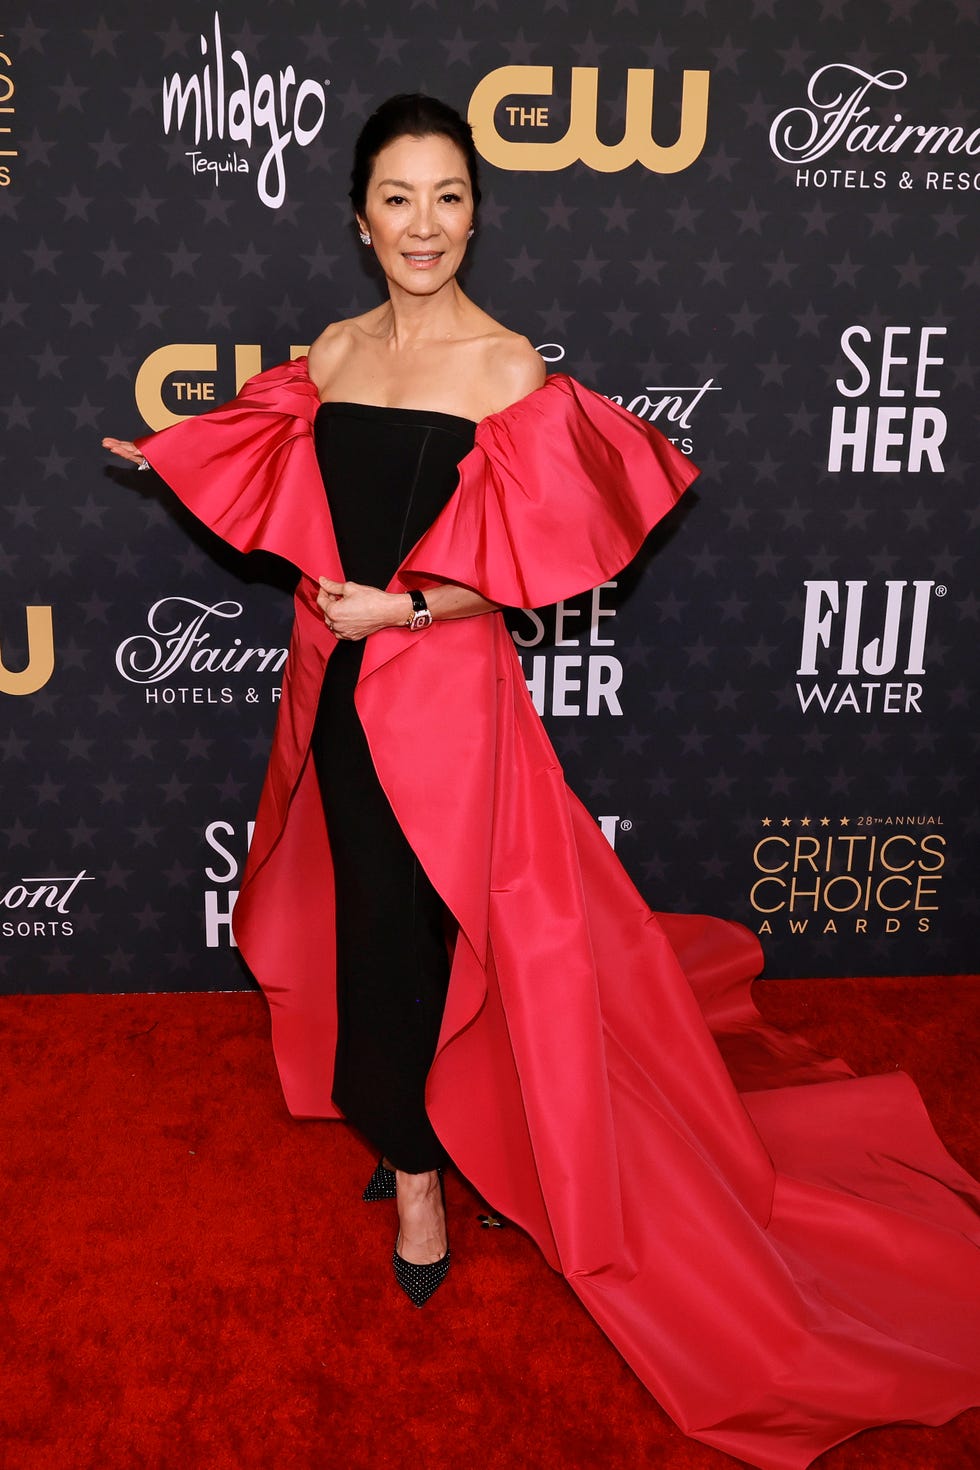 Critics Choice Awards 2023 Red Carpet: All the Fashion, Outfits & Looks